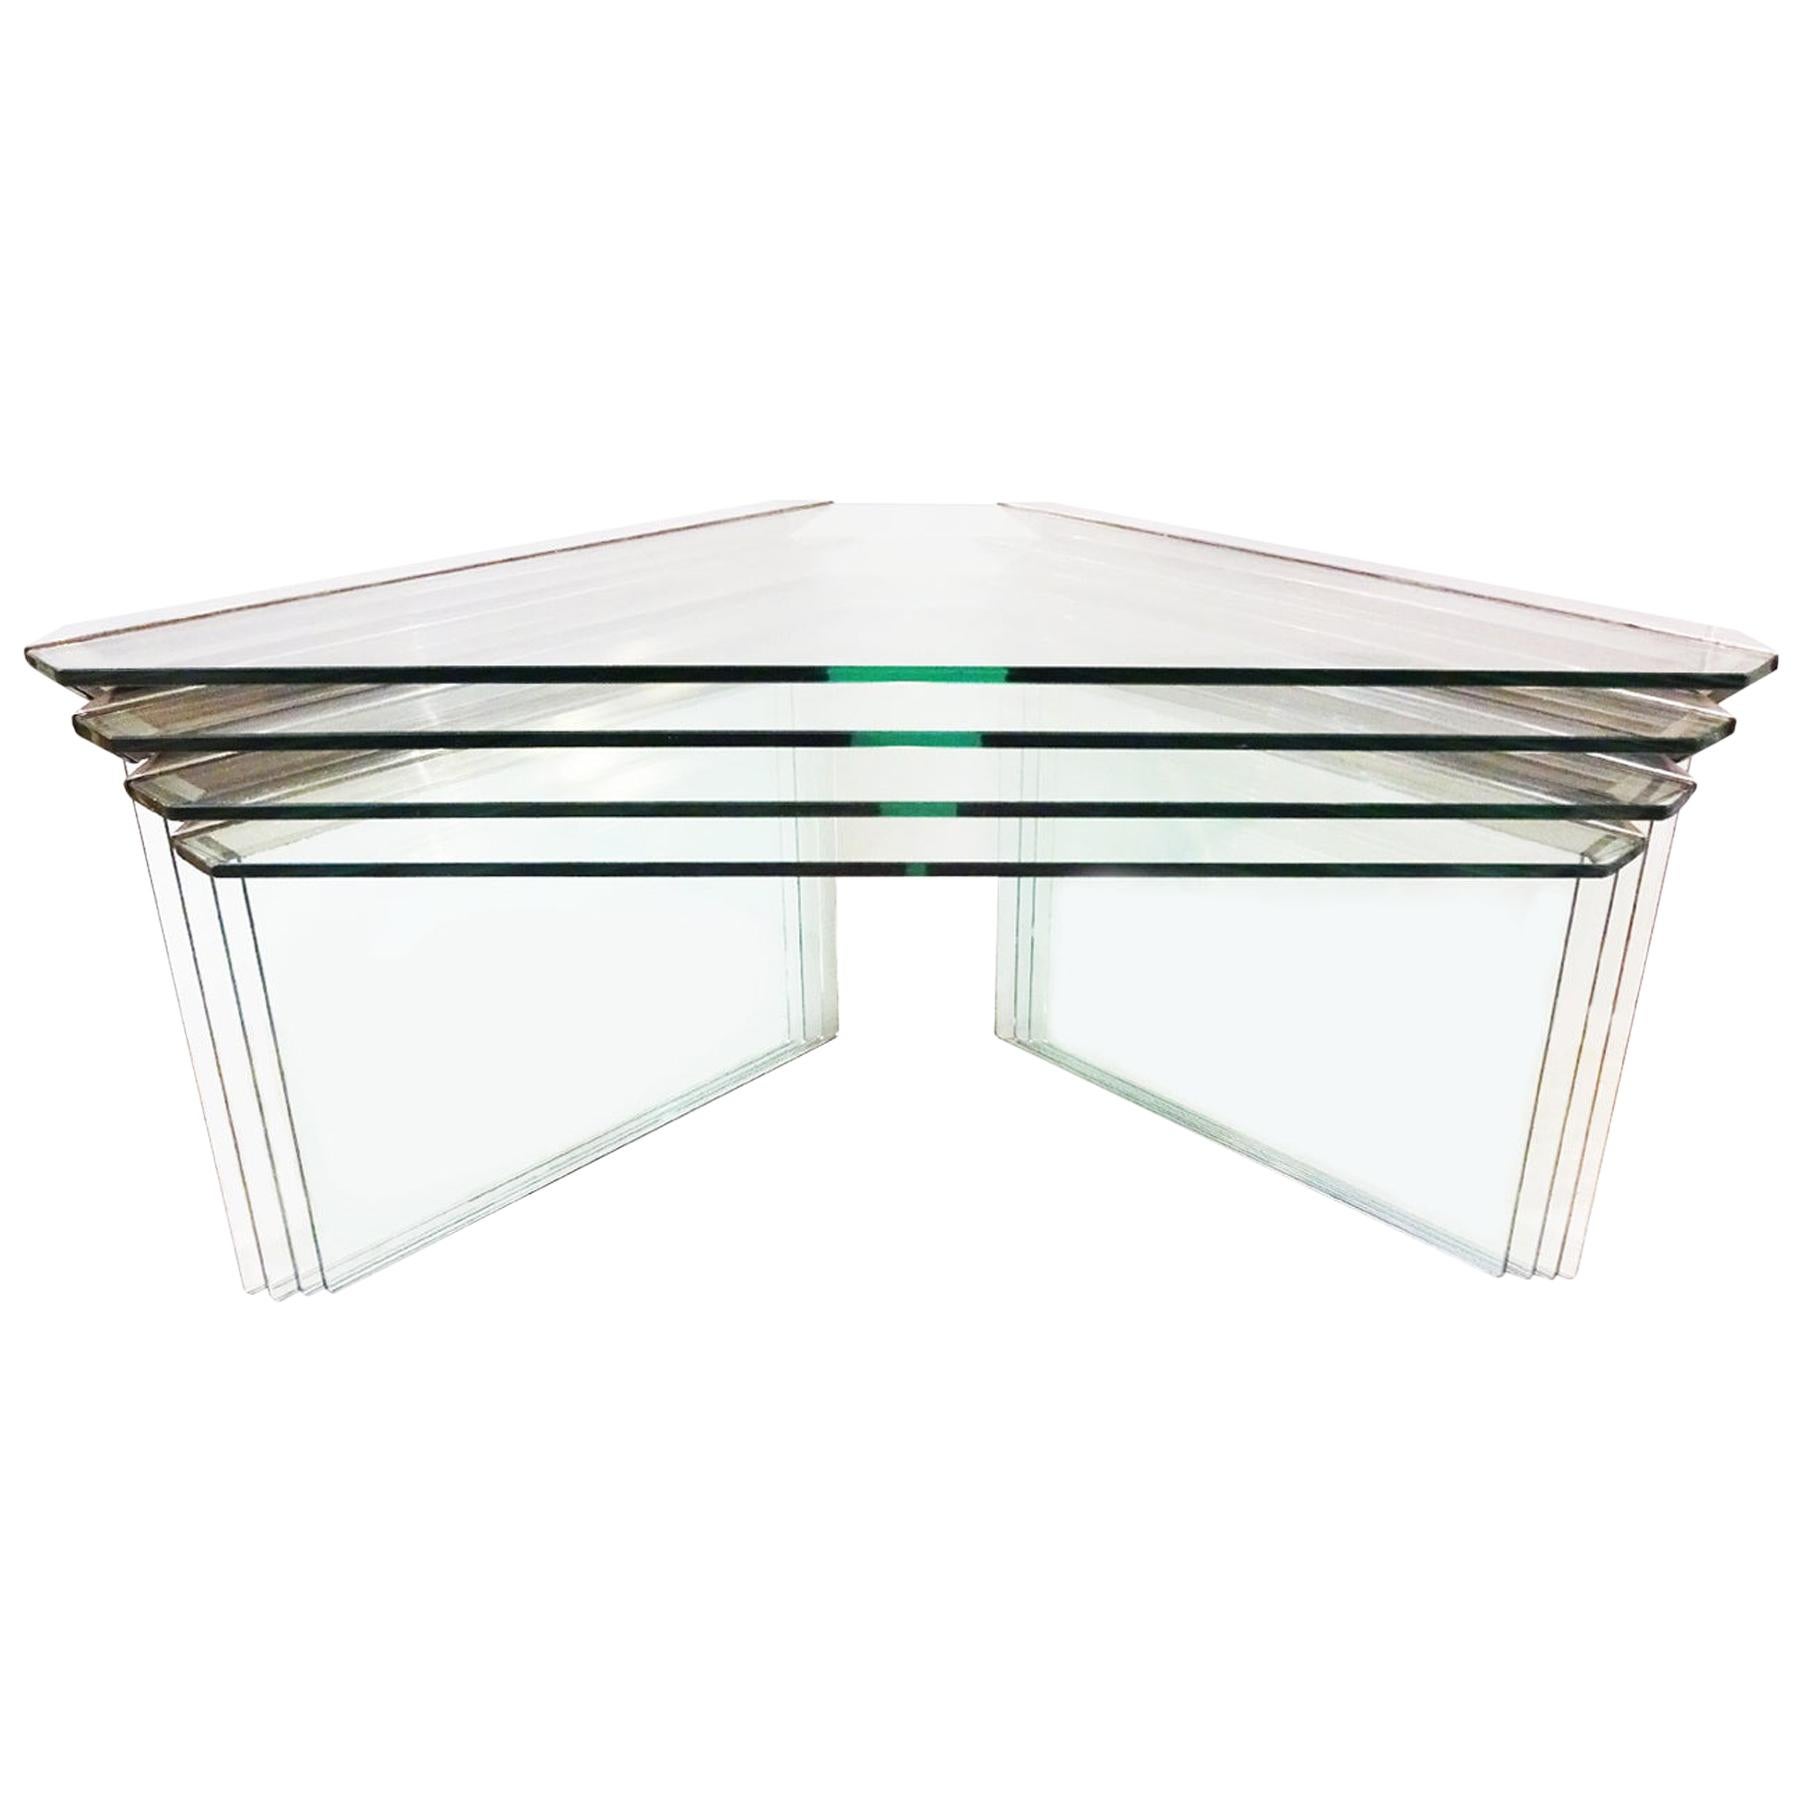 Set of 4 Vintage Nesting Side Tables in Chrome and Glass by Gallotti & Radice